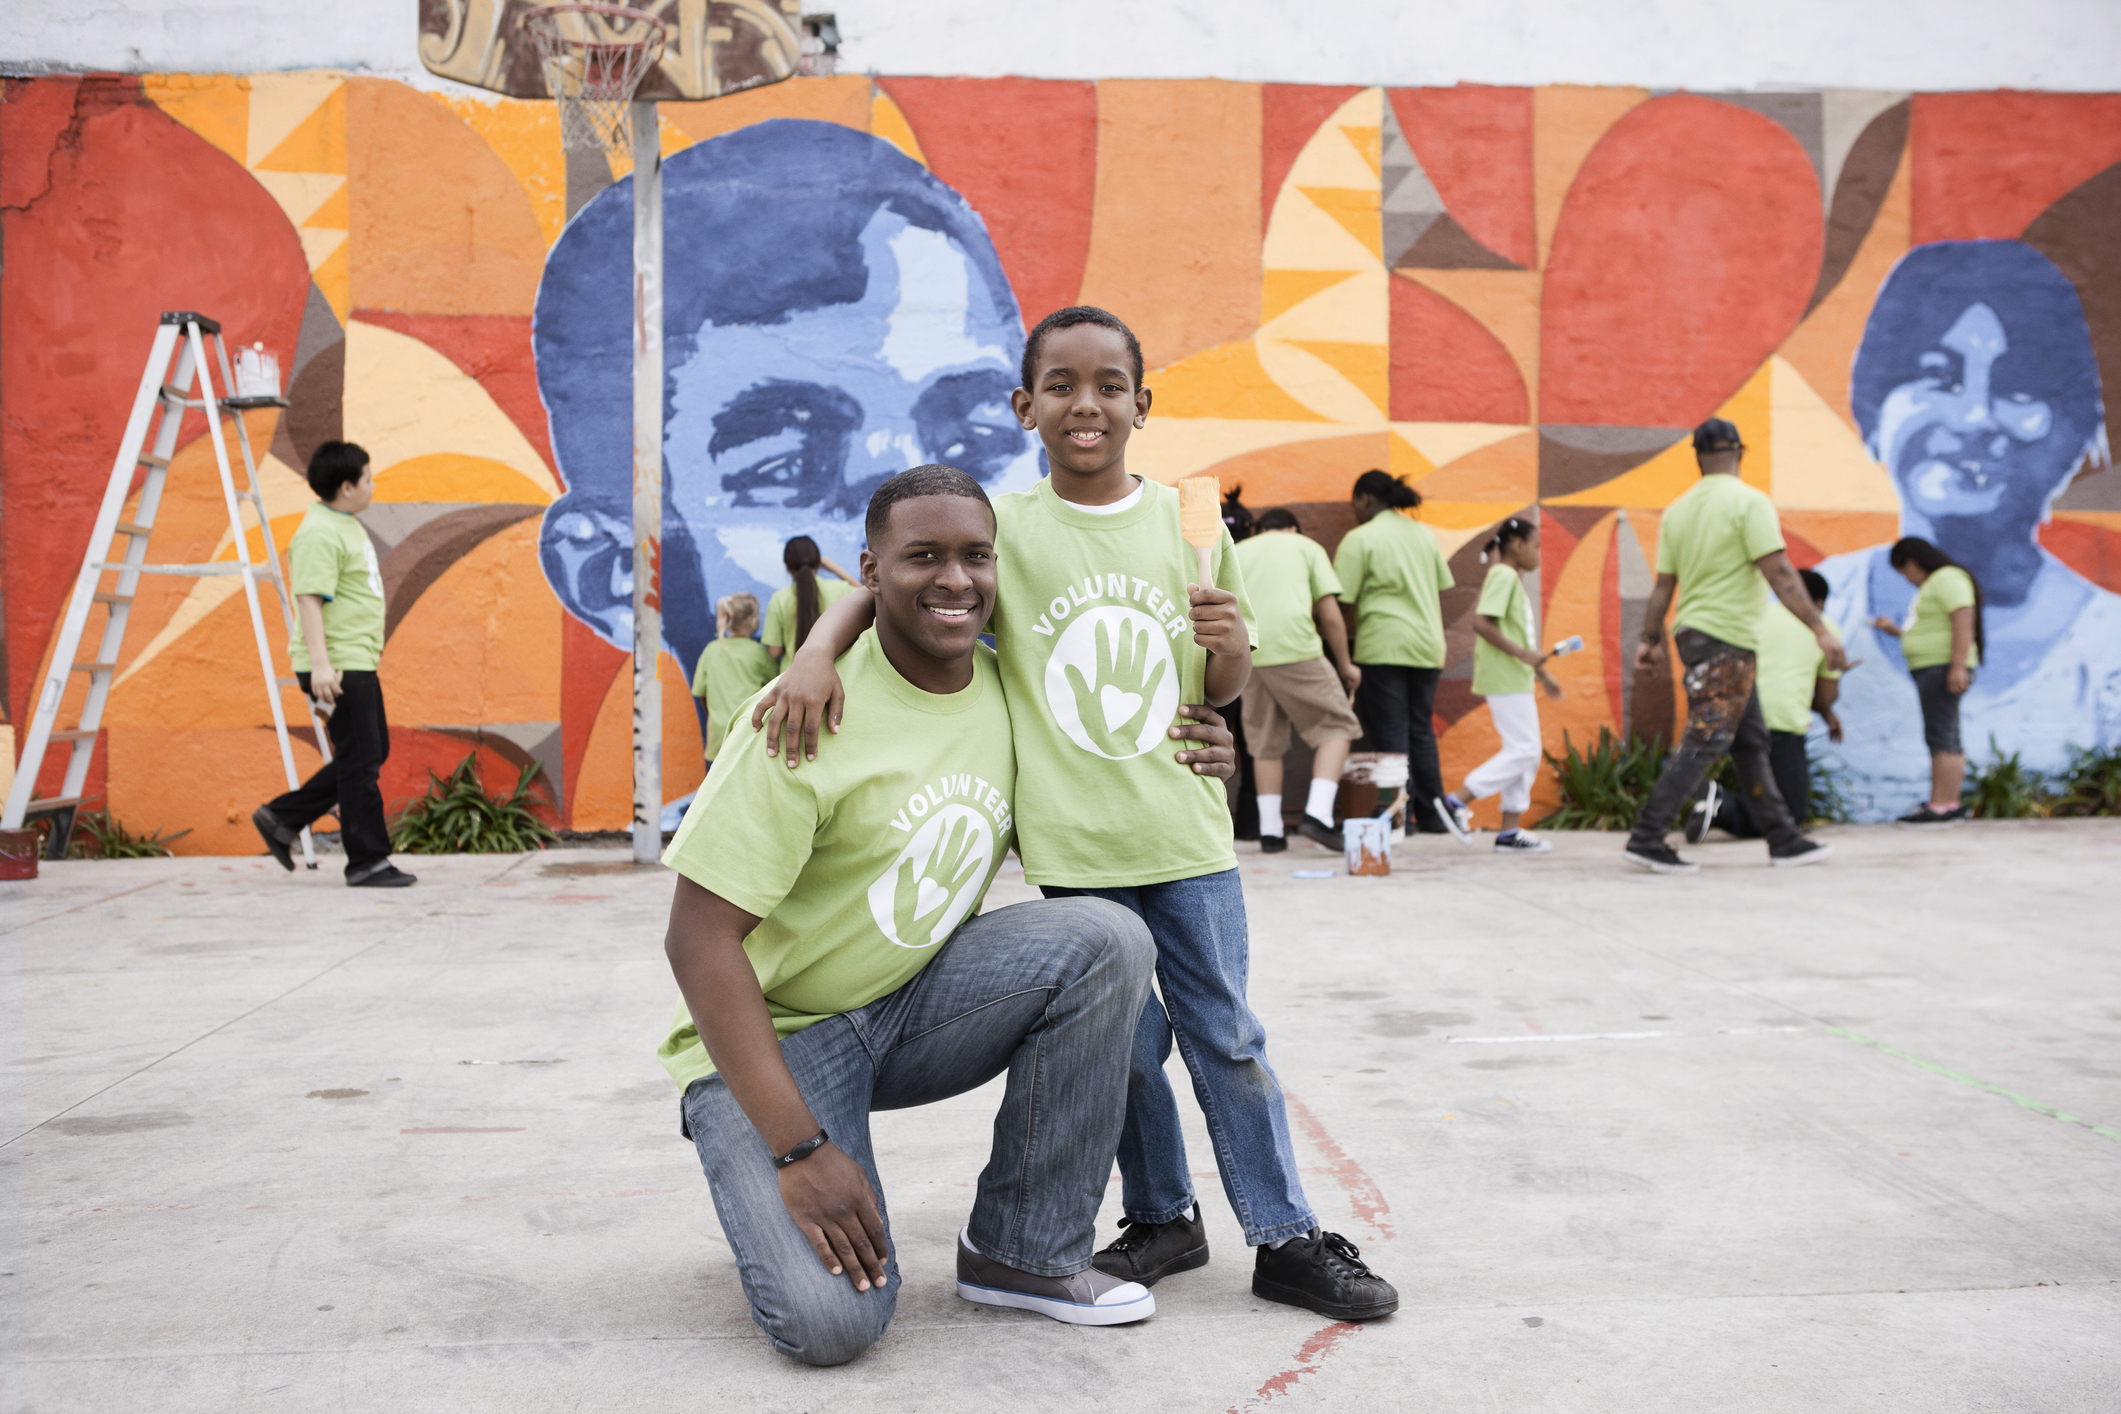 Black Philanthropy: Carrying on a Tradition of Community Service